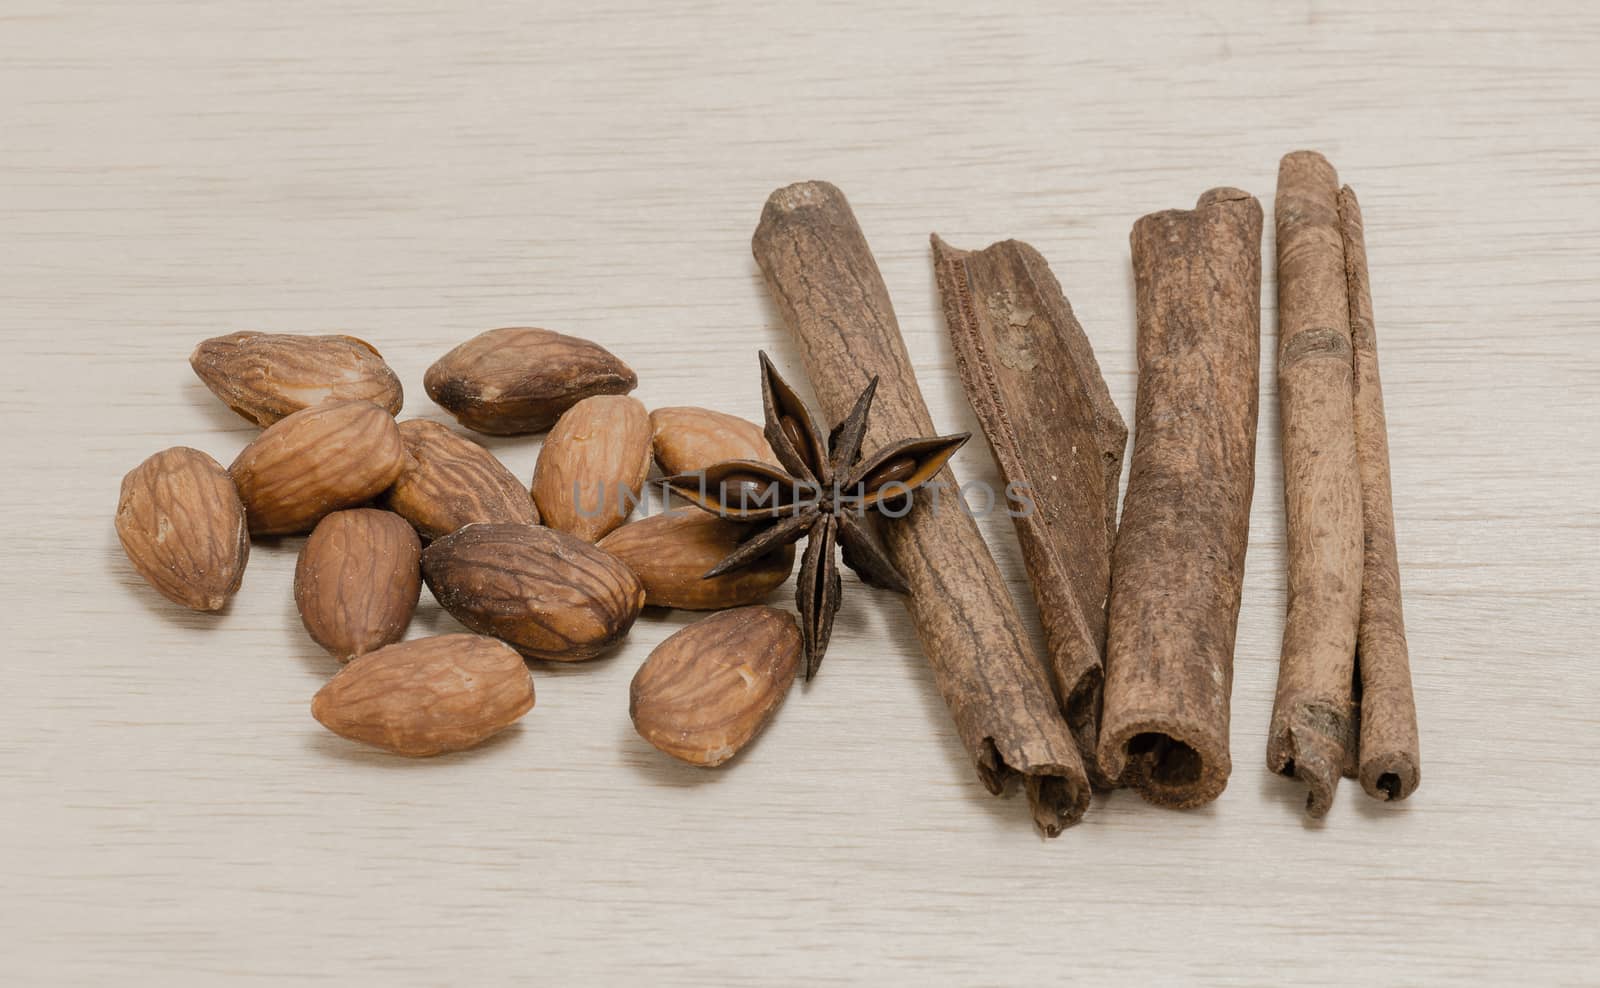 Random Spice on wood background almond cinnamon Star anise by chingraph